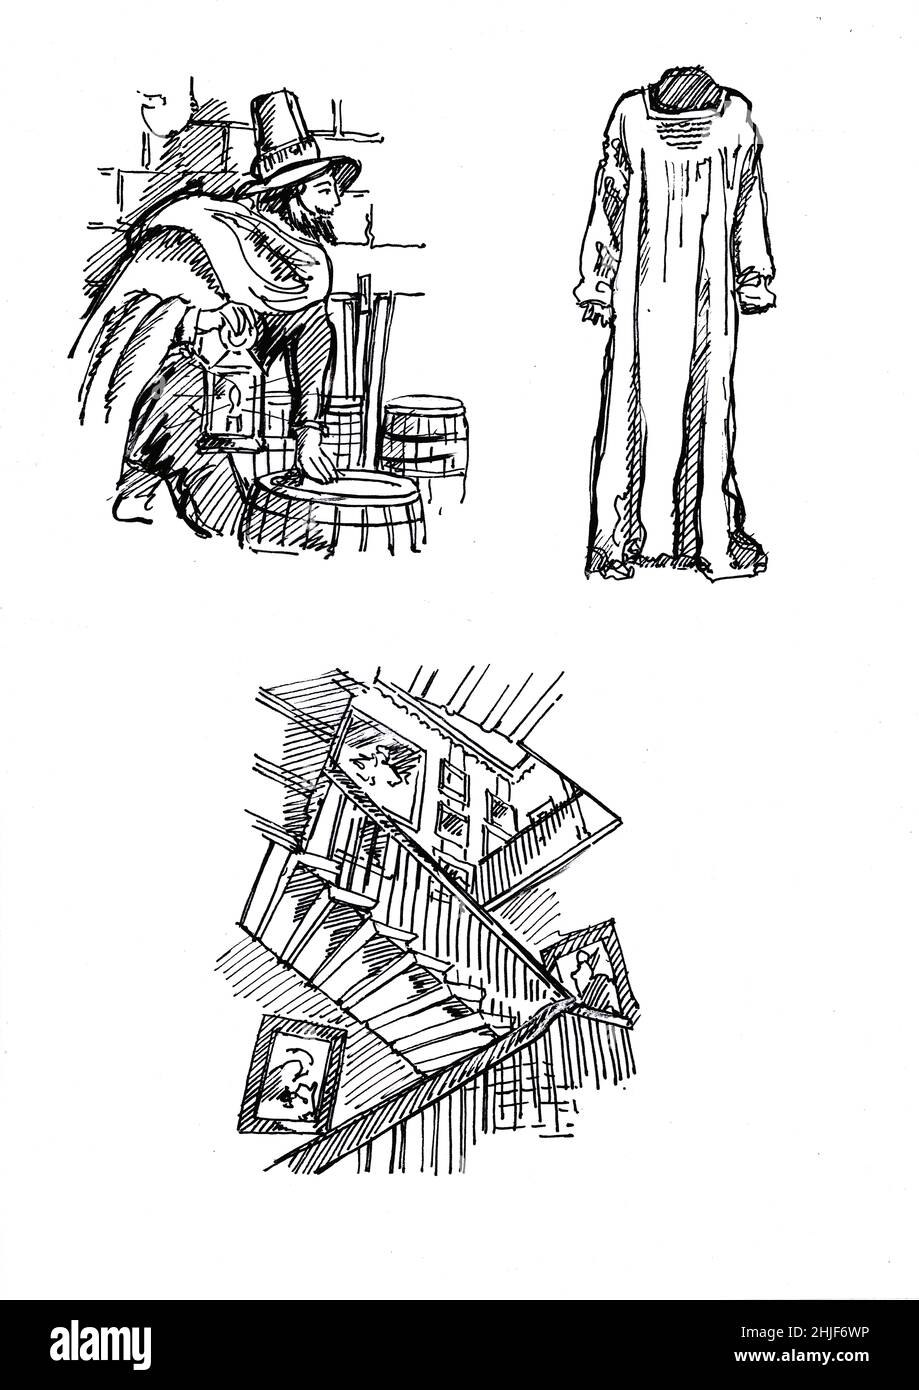 Sketches of Guy Fawkes, a robe and an ancient staircase on a white background. Stock Photo